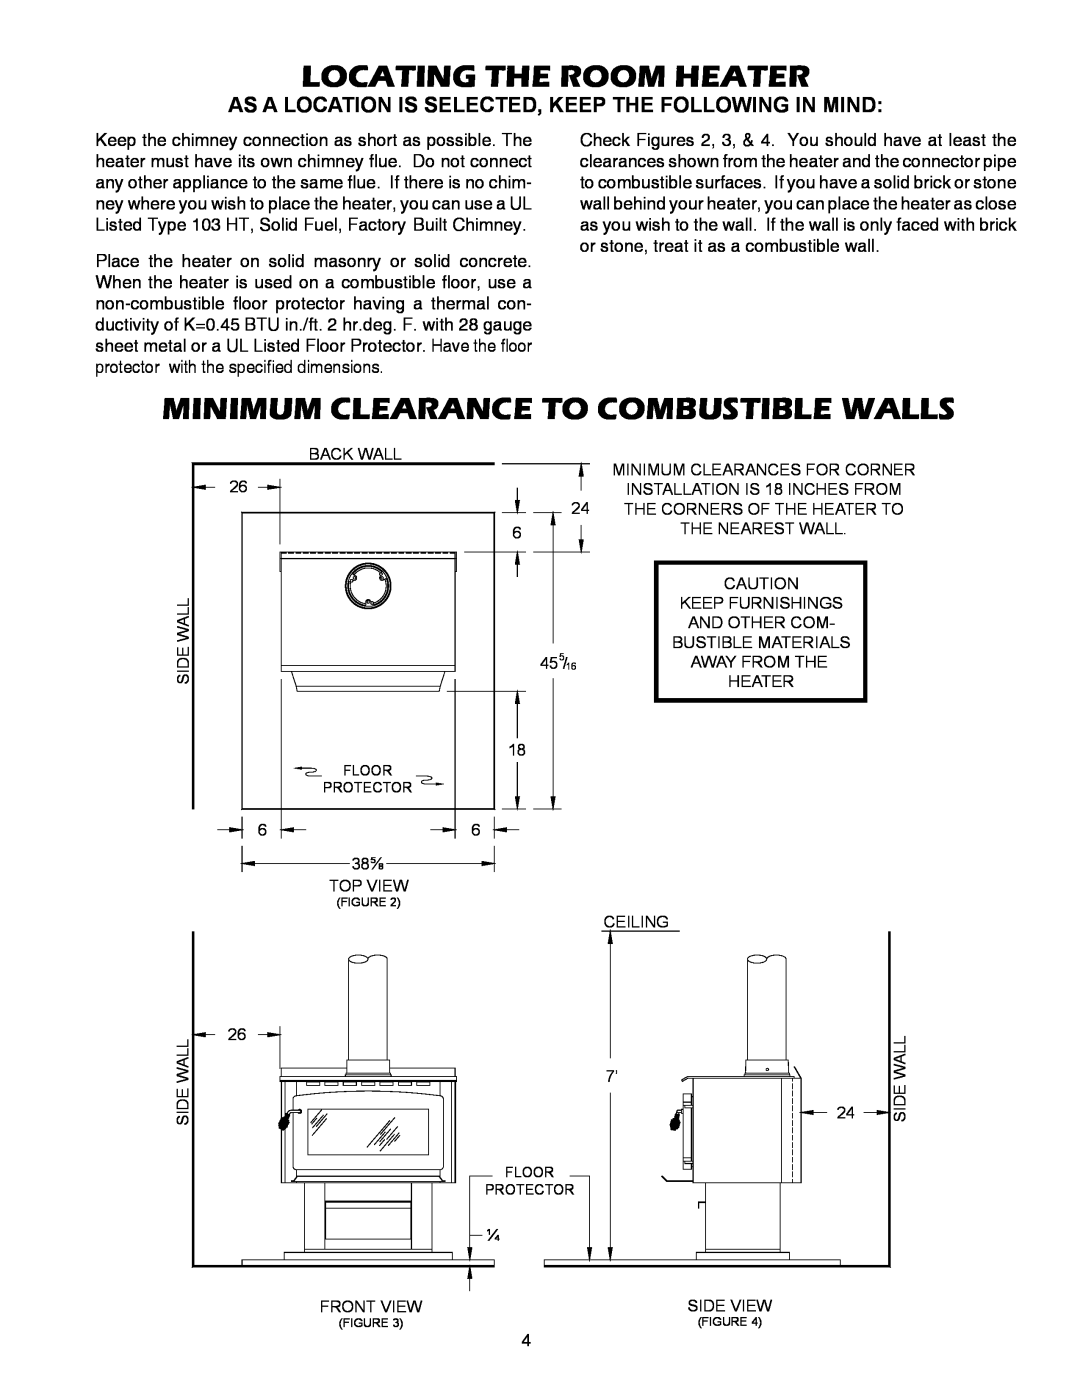 United States Stove 2007B owner manual Locating The Room Heater, Minimum Clearance To Combustible Walls 